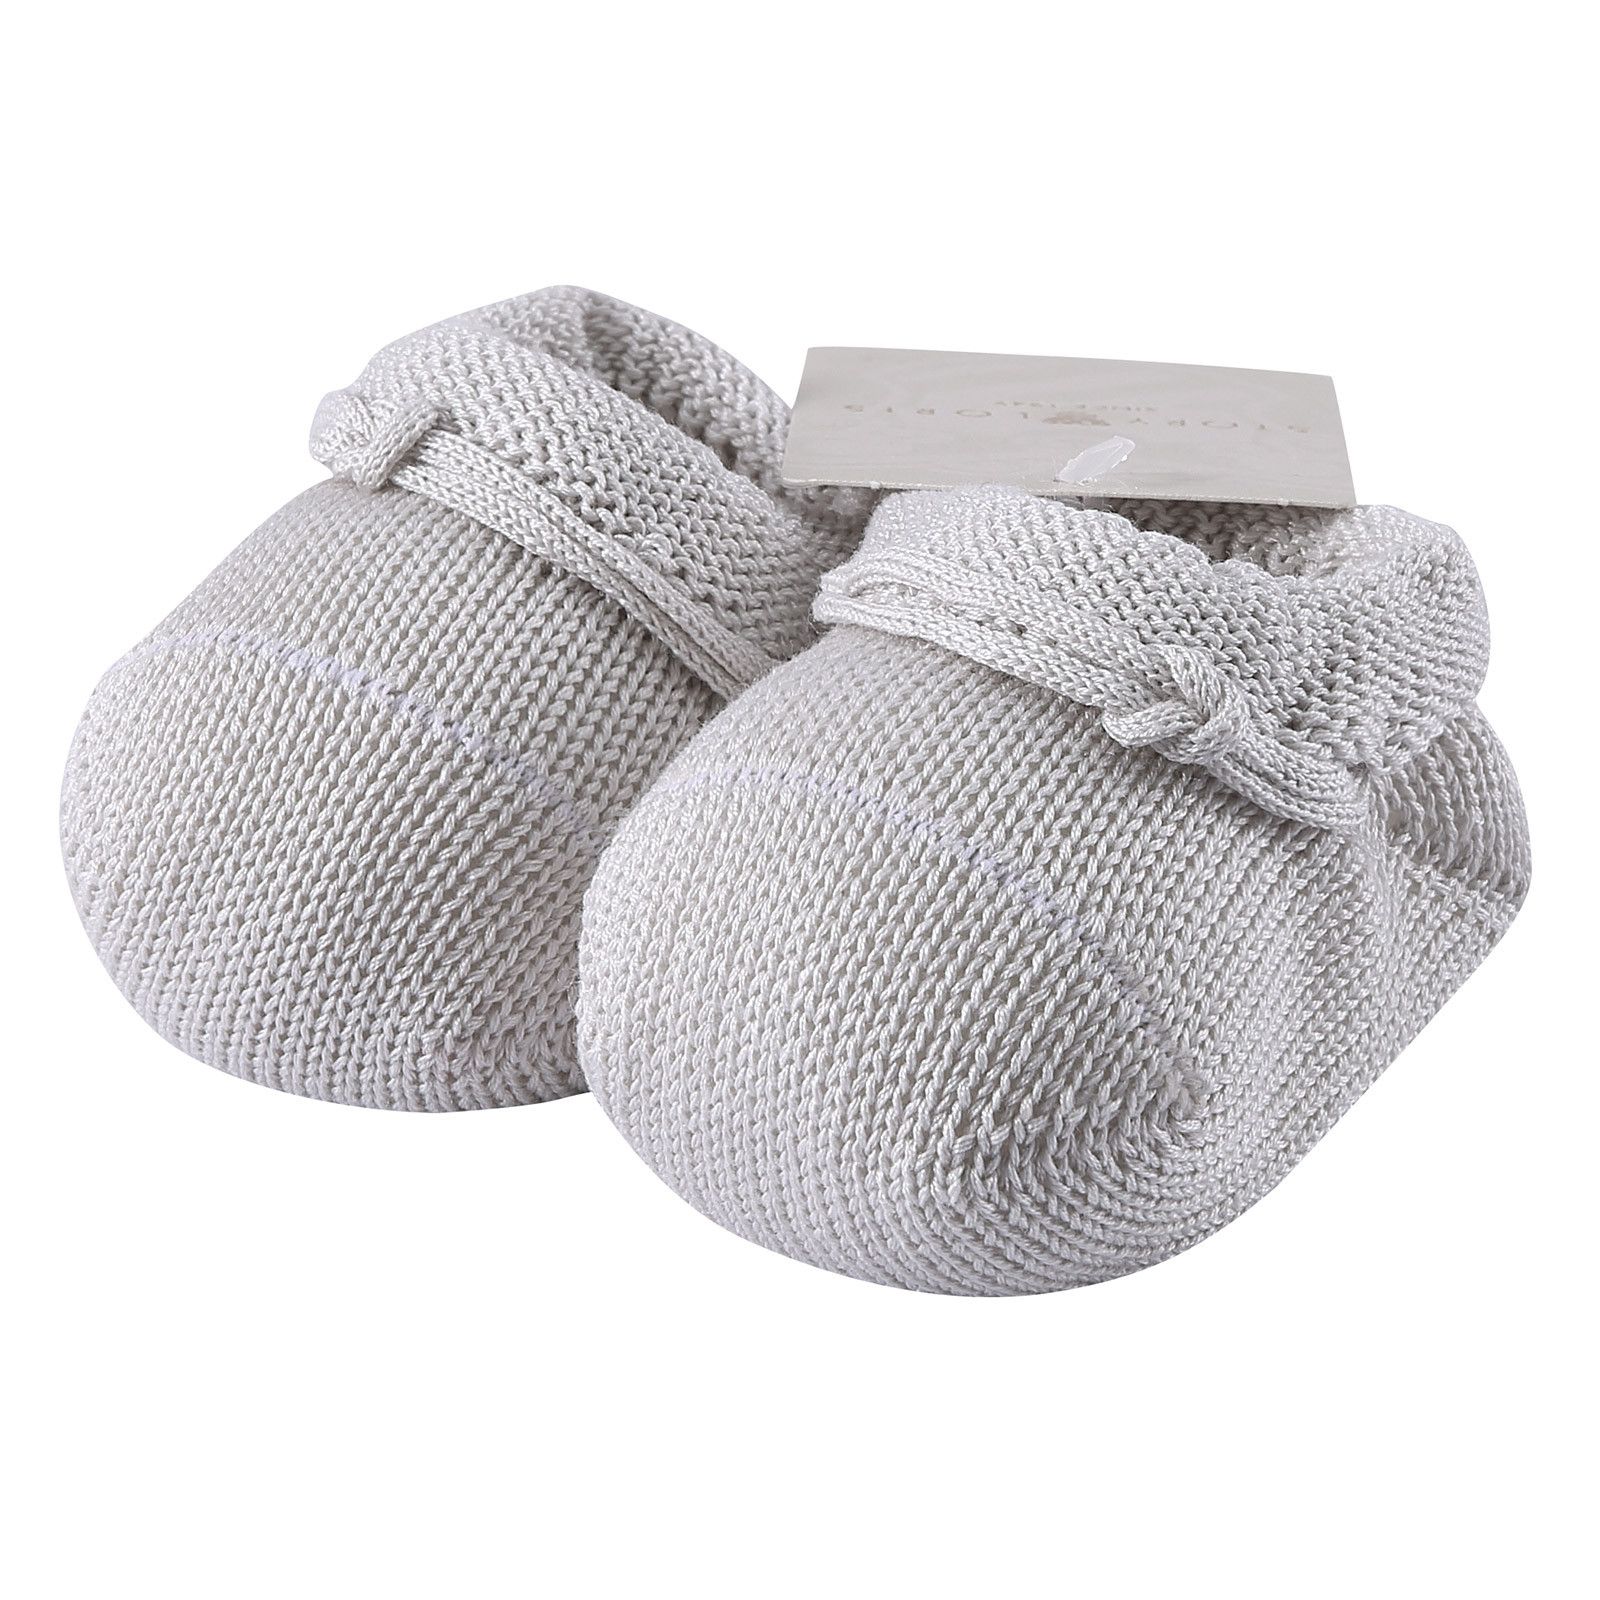 Baby Grey Knitted Cotton Shoes - CÉMAROSE | Children's Fashion Store - 1